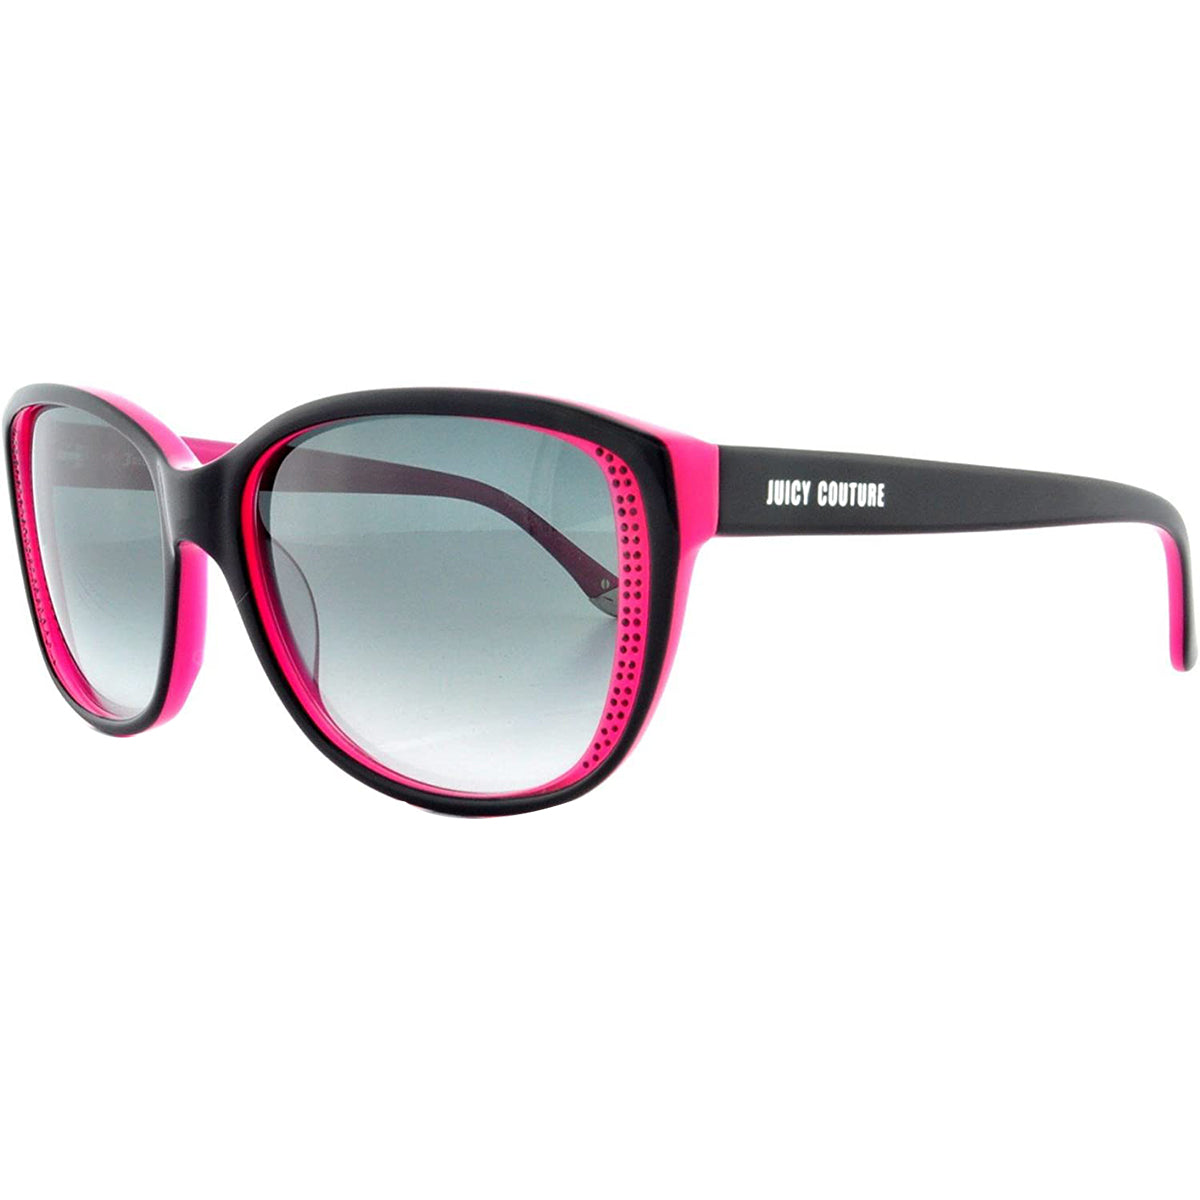 Juicy Couture 518/S Women's Lifestyle Sunglasses-JUC